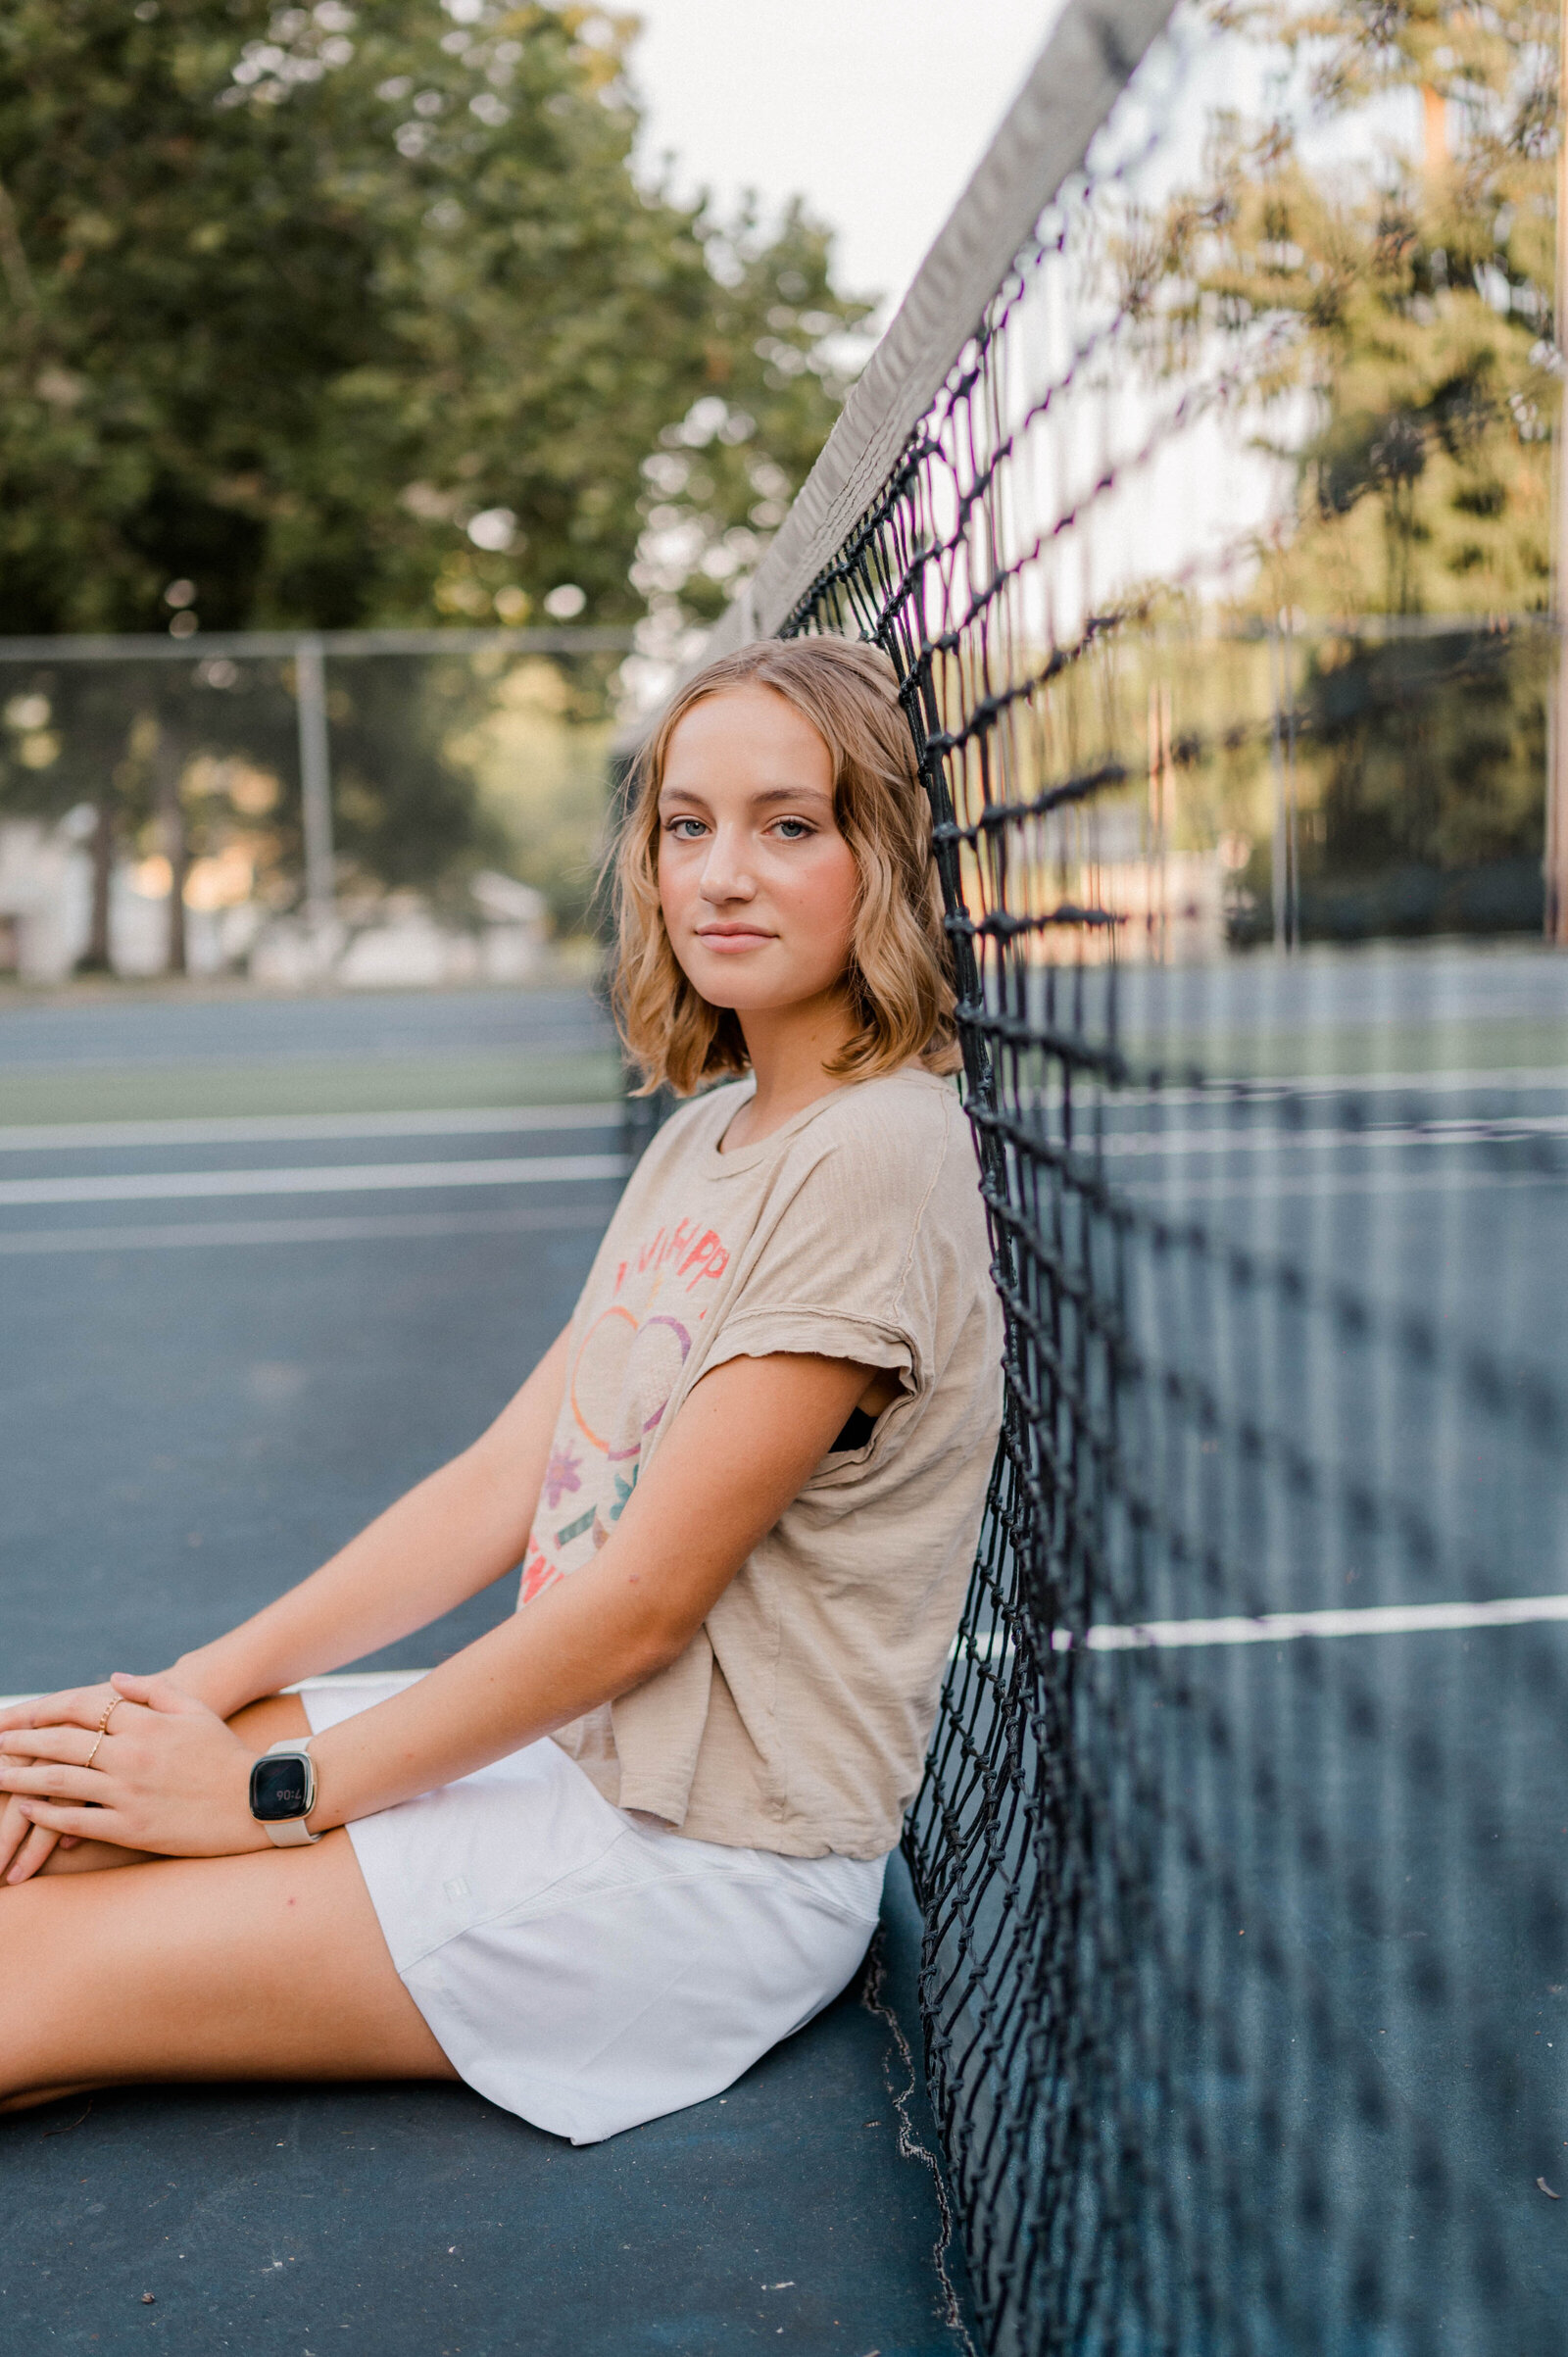 Girl poses for camera on the tennis court leaning against the net.